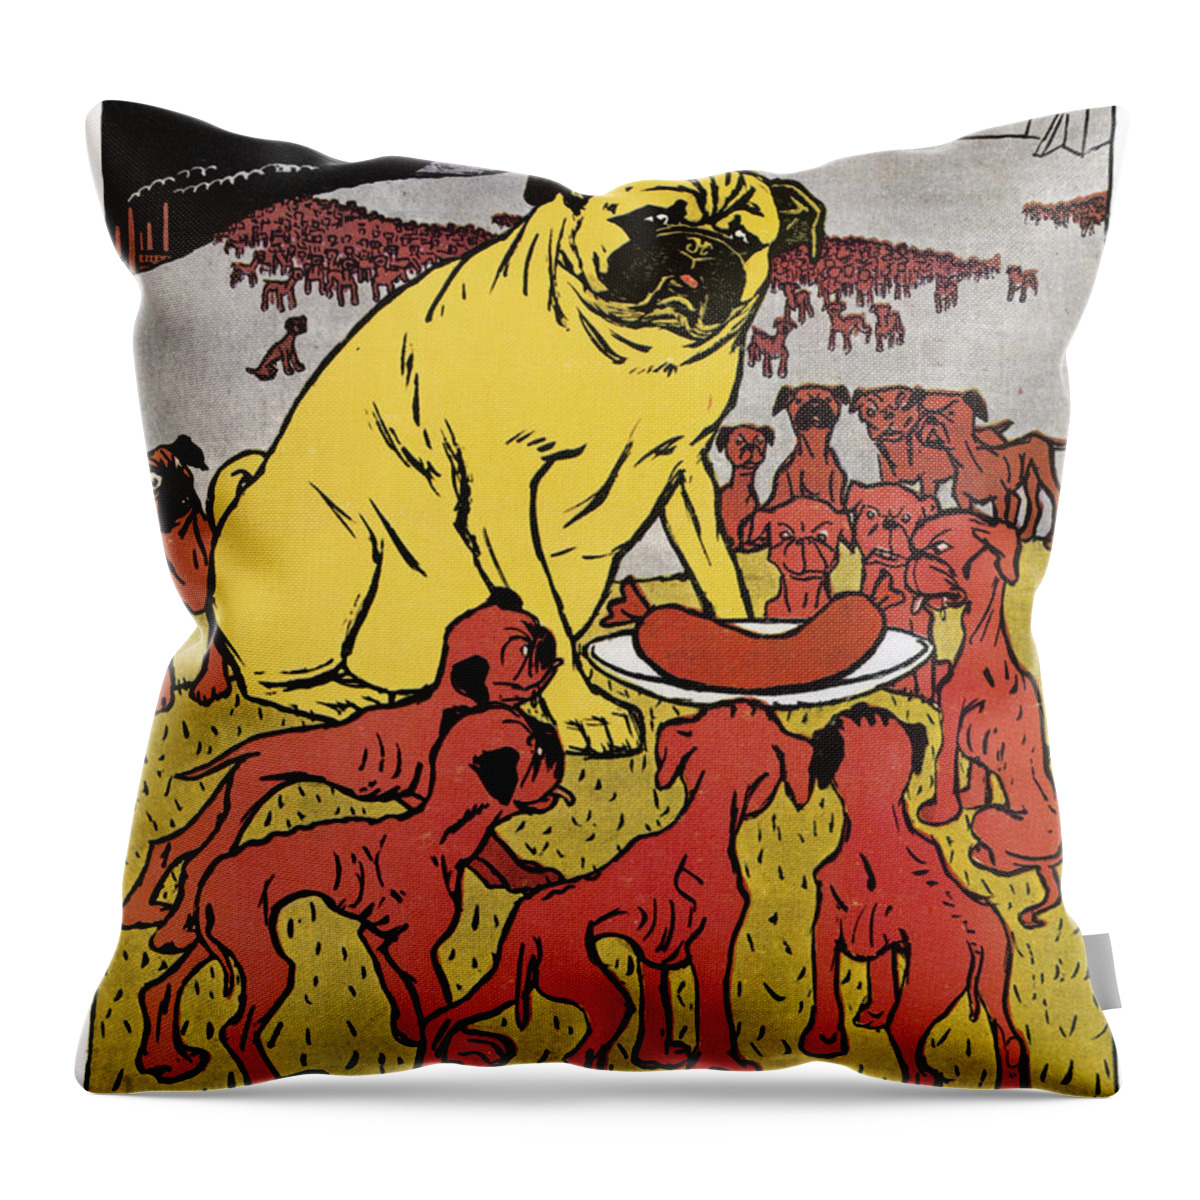 1904 Throw Pillow featuring the photograph Labor Cartoon, 1904 by Granger